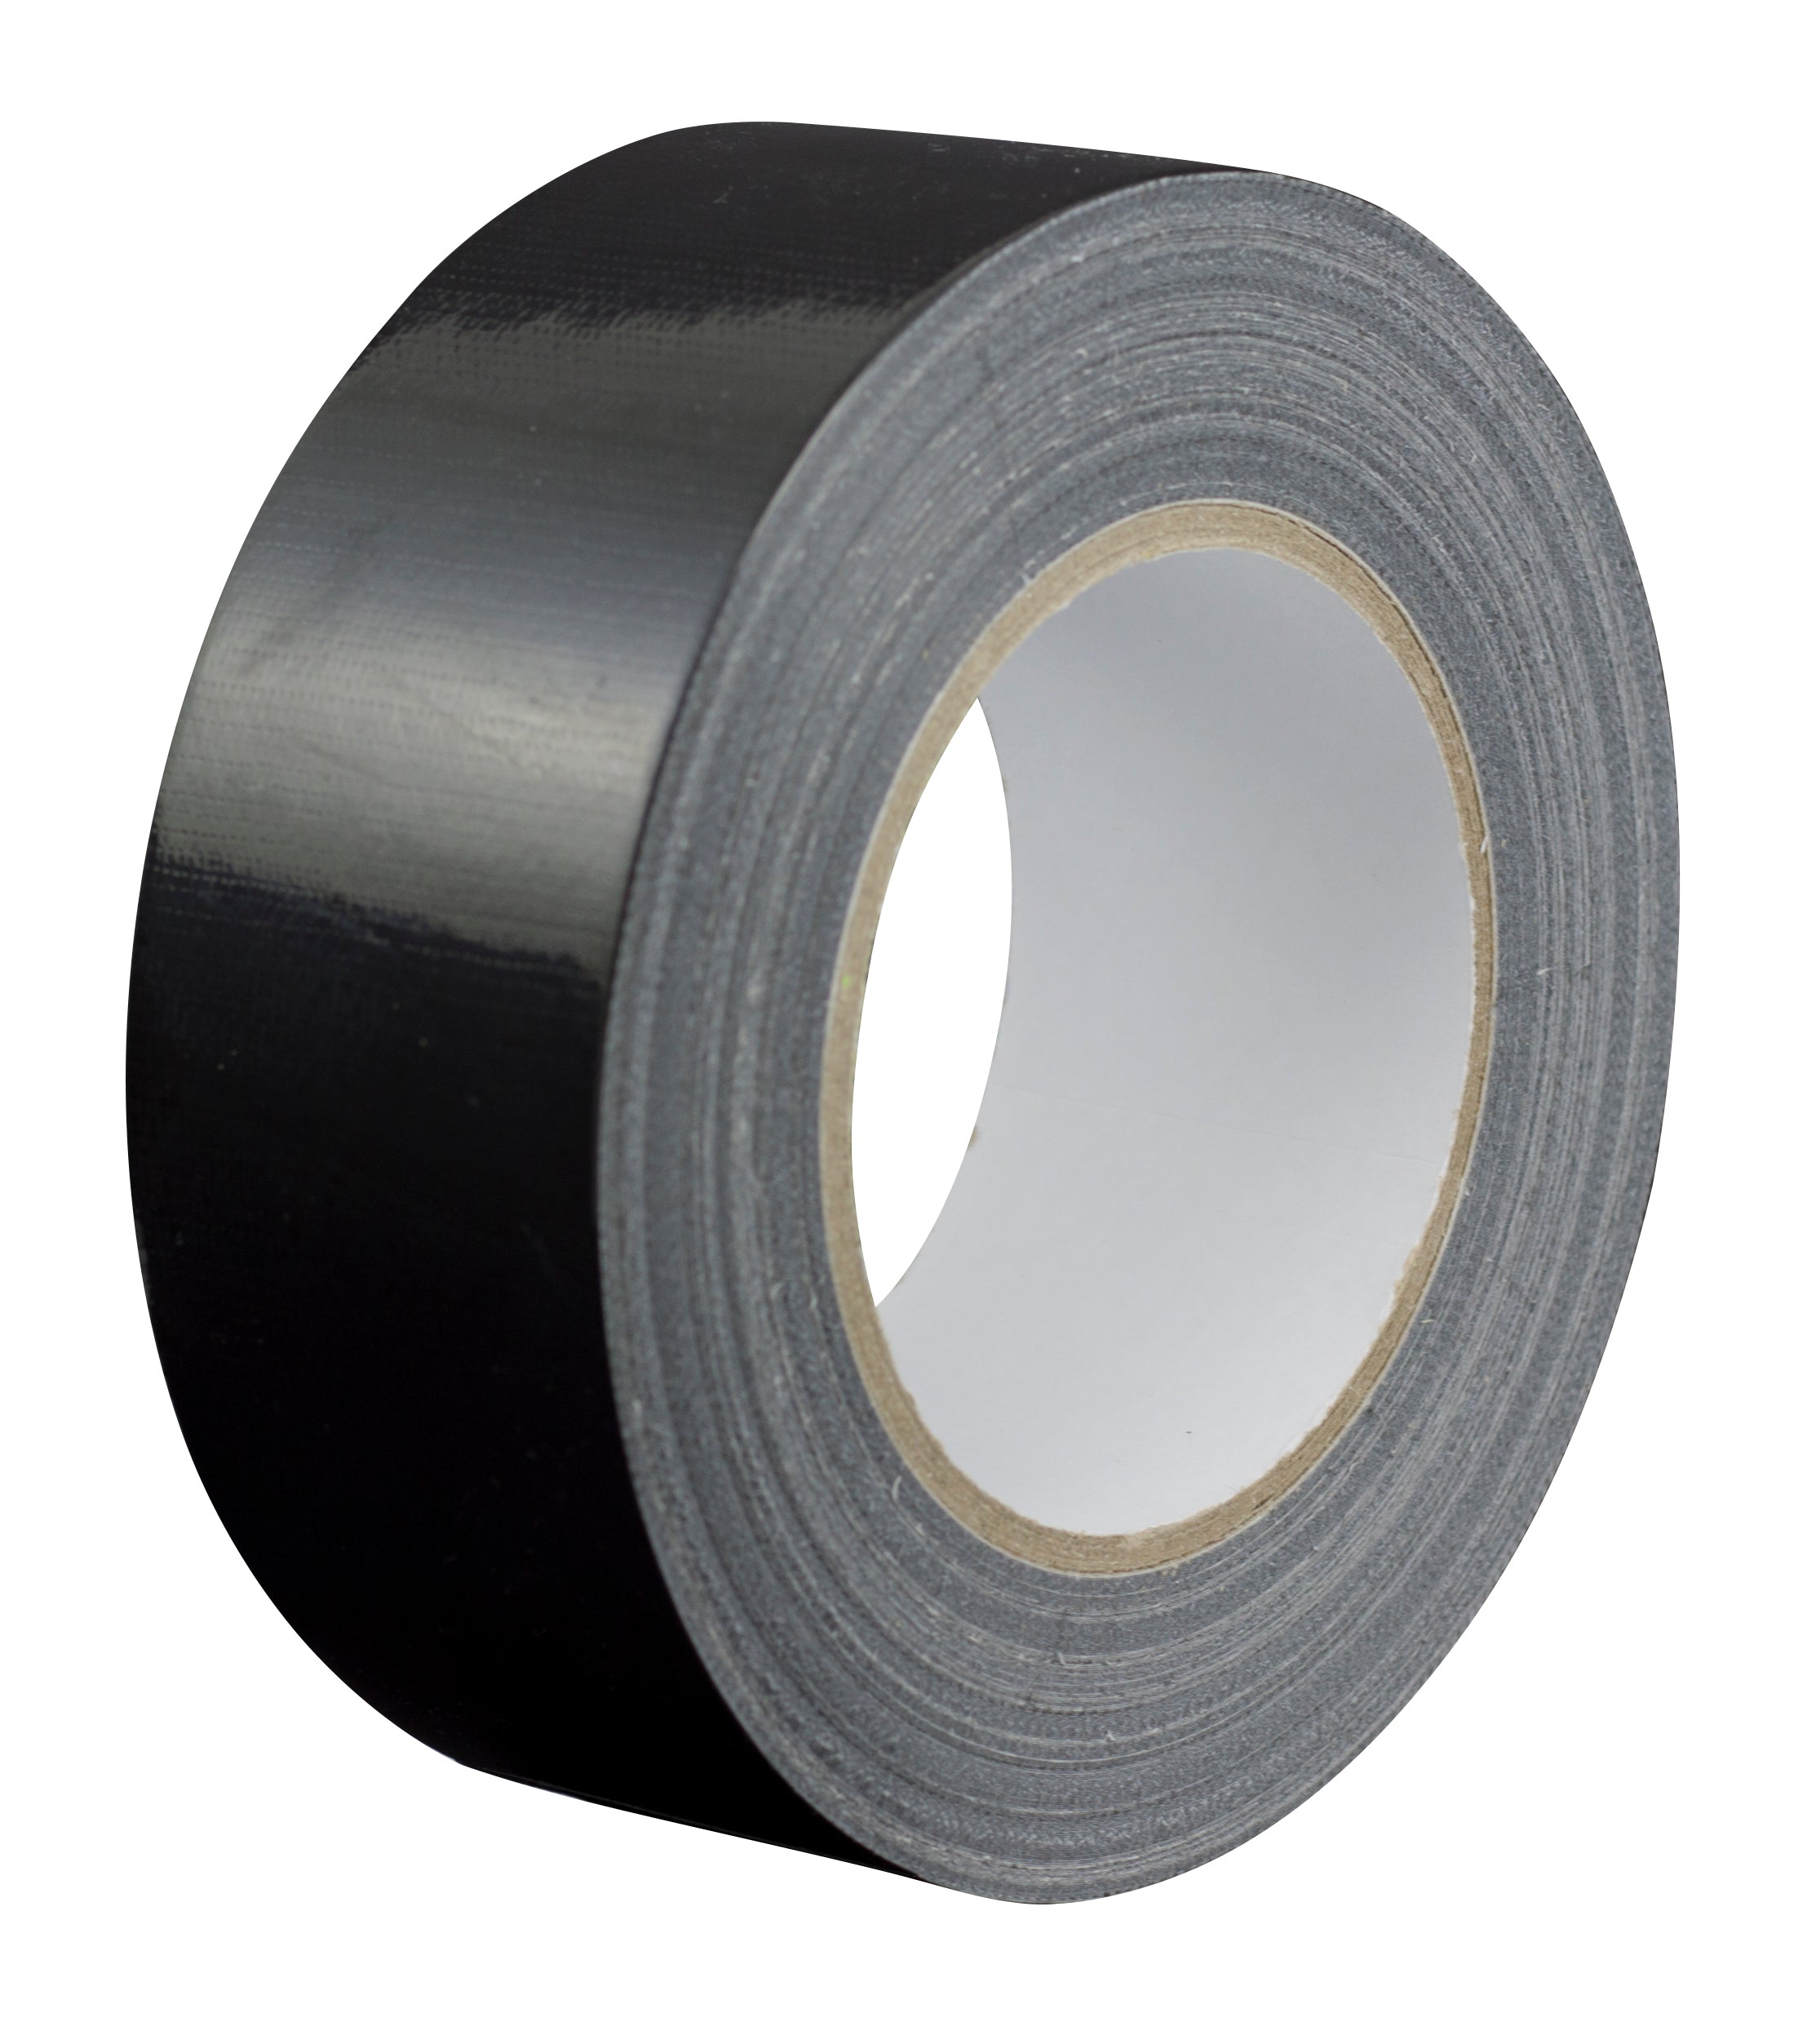 Gaffer/Duct Tape 100mm x 50m (BLACK) 50 Mesh 0.18mm Thickness  - Per Pack